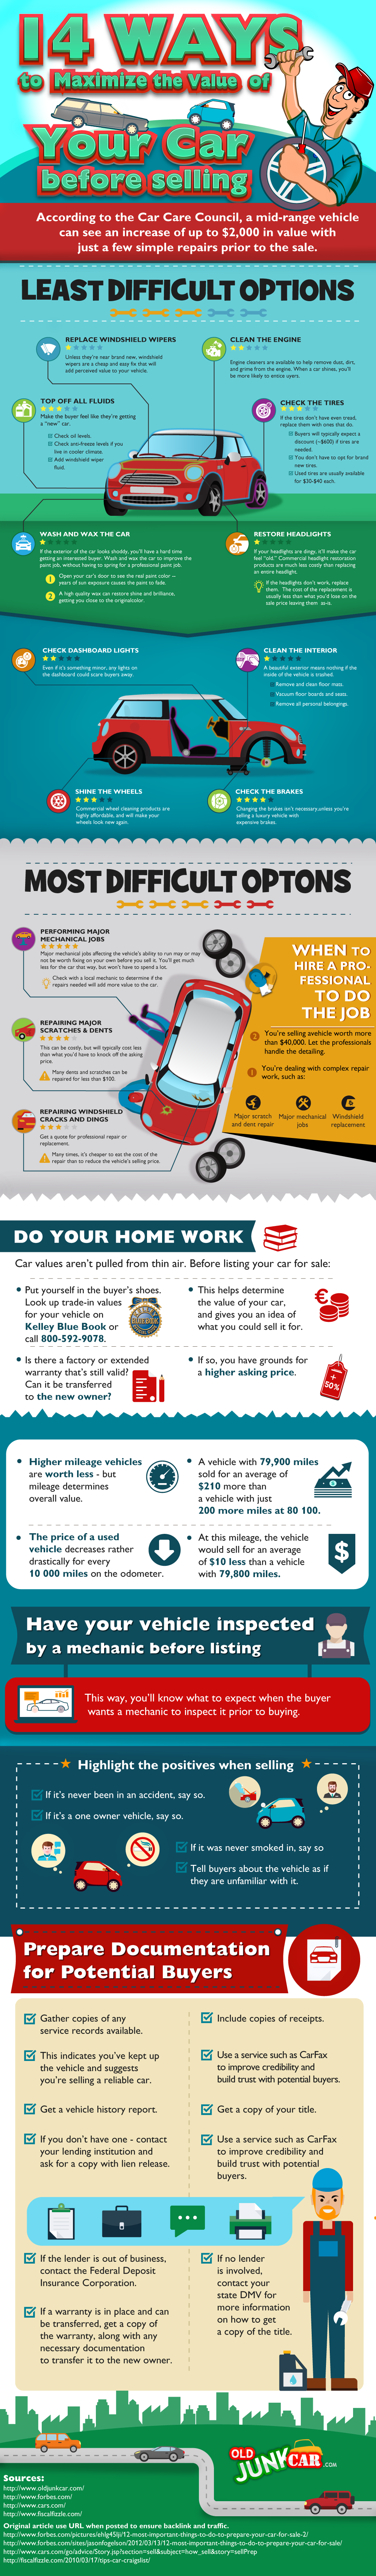 How to Maximize Resale Value of a Car - Infographics